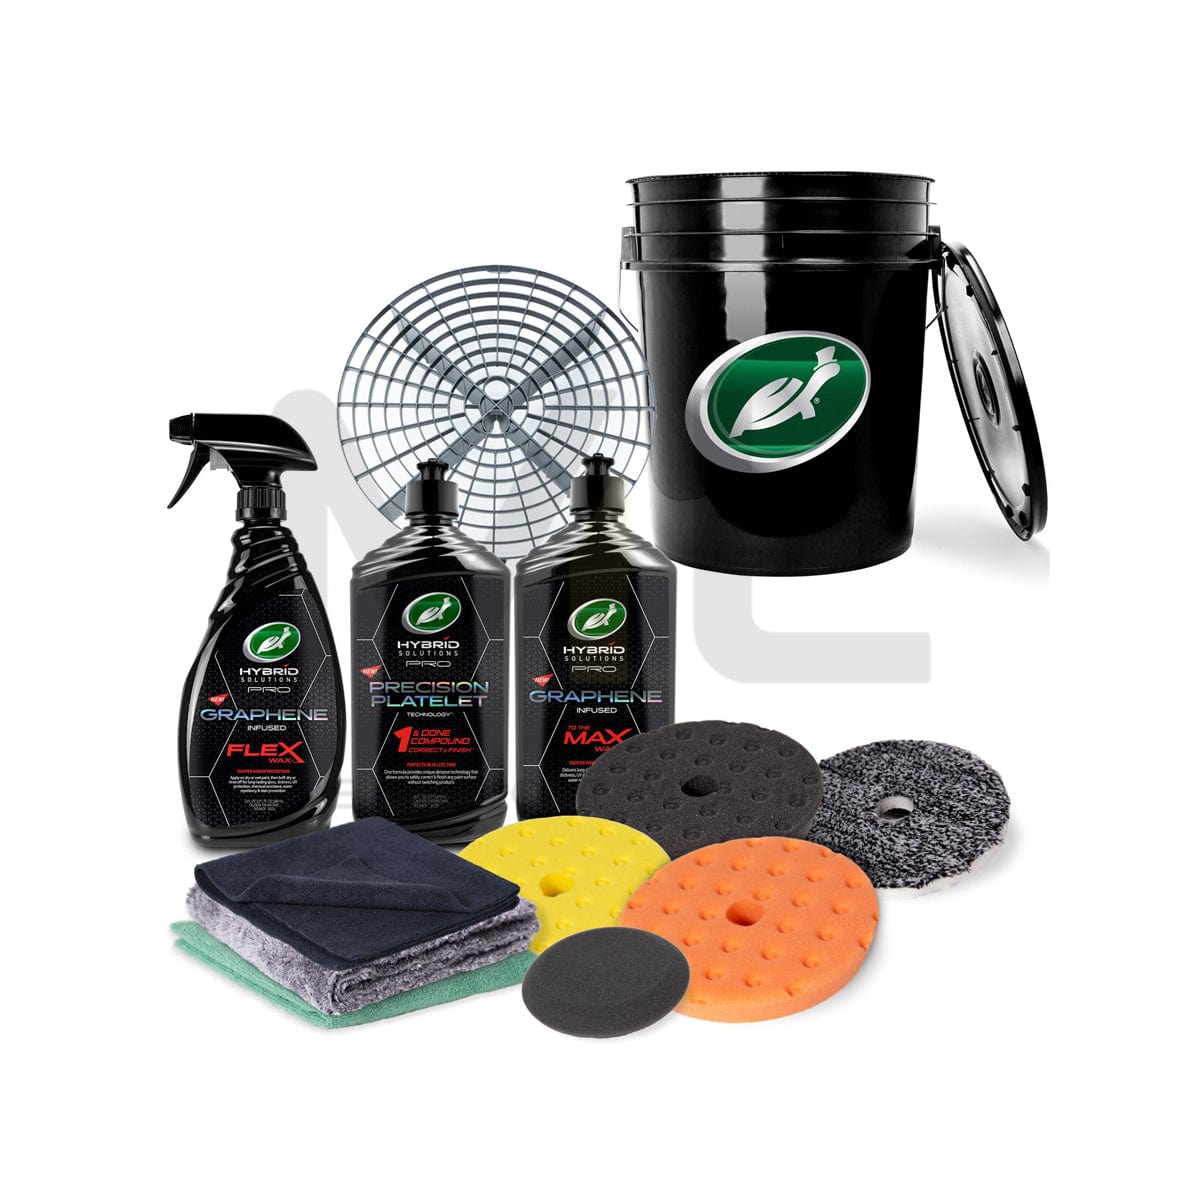 Turtle Wax: Hybrid Solutions PRO is HERE!